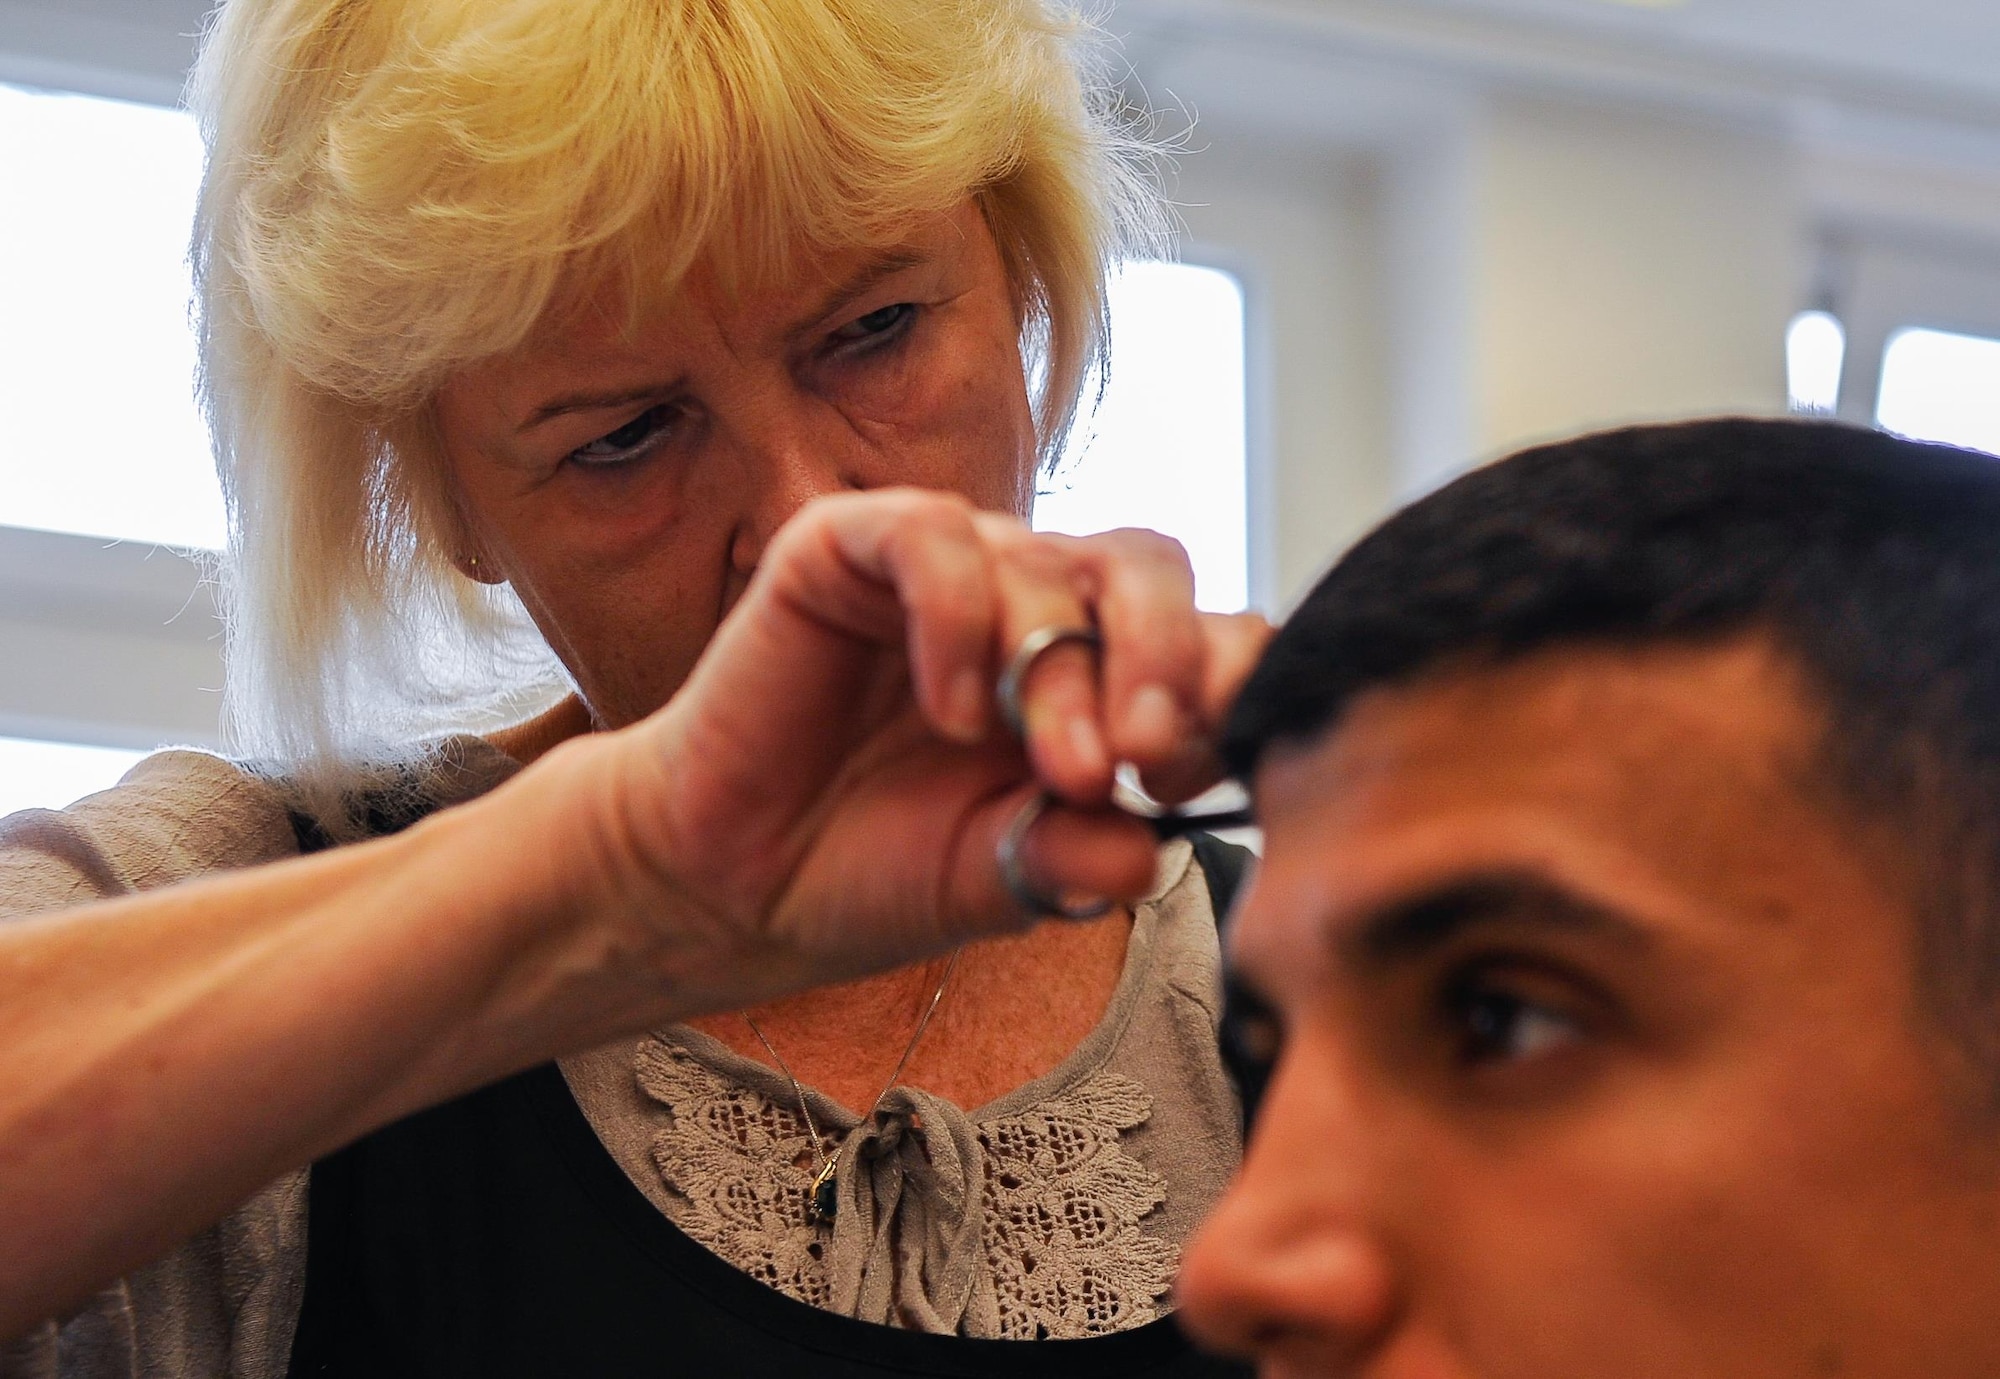 Claudia Gomez, barber, cuts Airman 1st Class Hector Montoya’s hair, 721st Aerial Port Squadron passenger service agent, Sept. 20, 2016, at Ramstein Air Base, Germany. Gomez has cut hair for thousands of Airmen and families over the 35 years she’s worked on base. (U.S. Air Force photo/Airman 1st Class Lane T. Plummer)